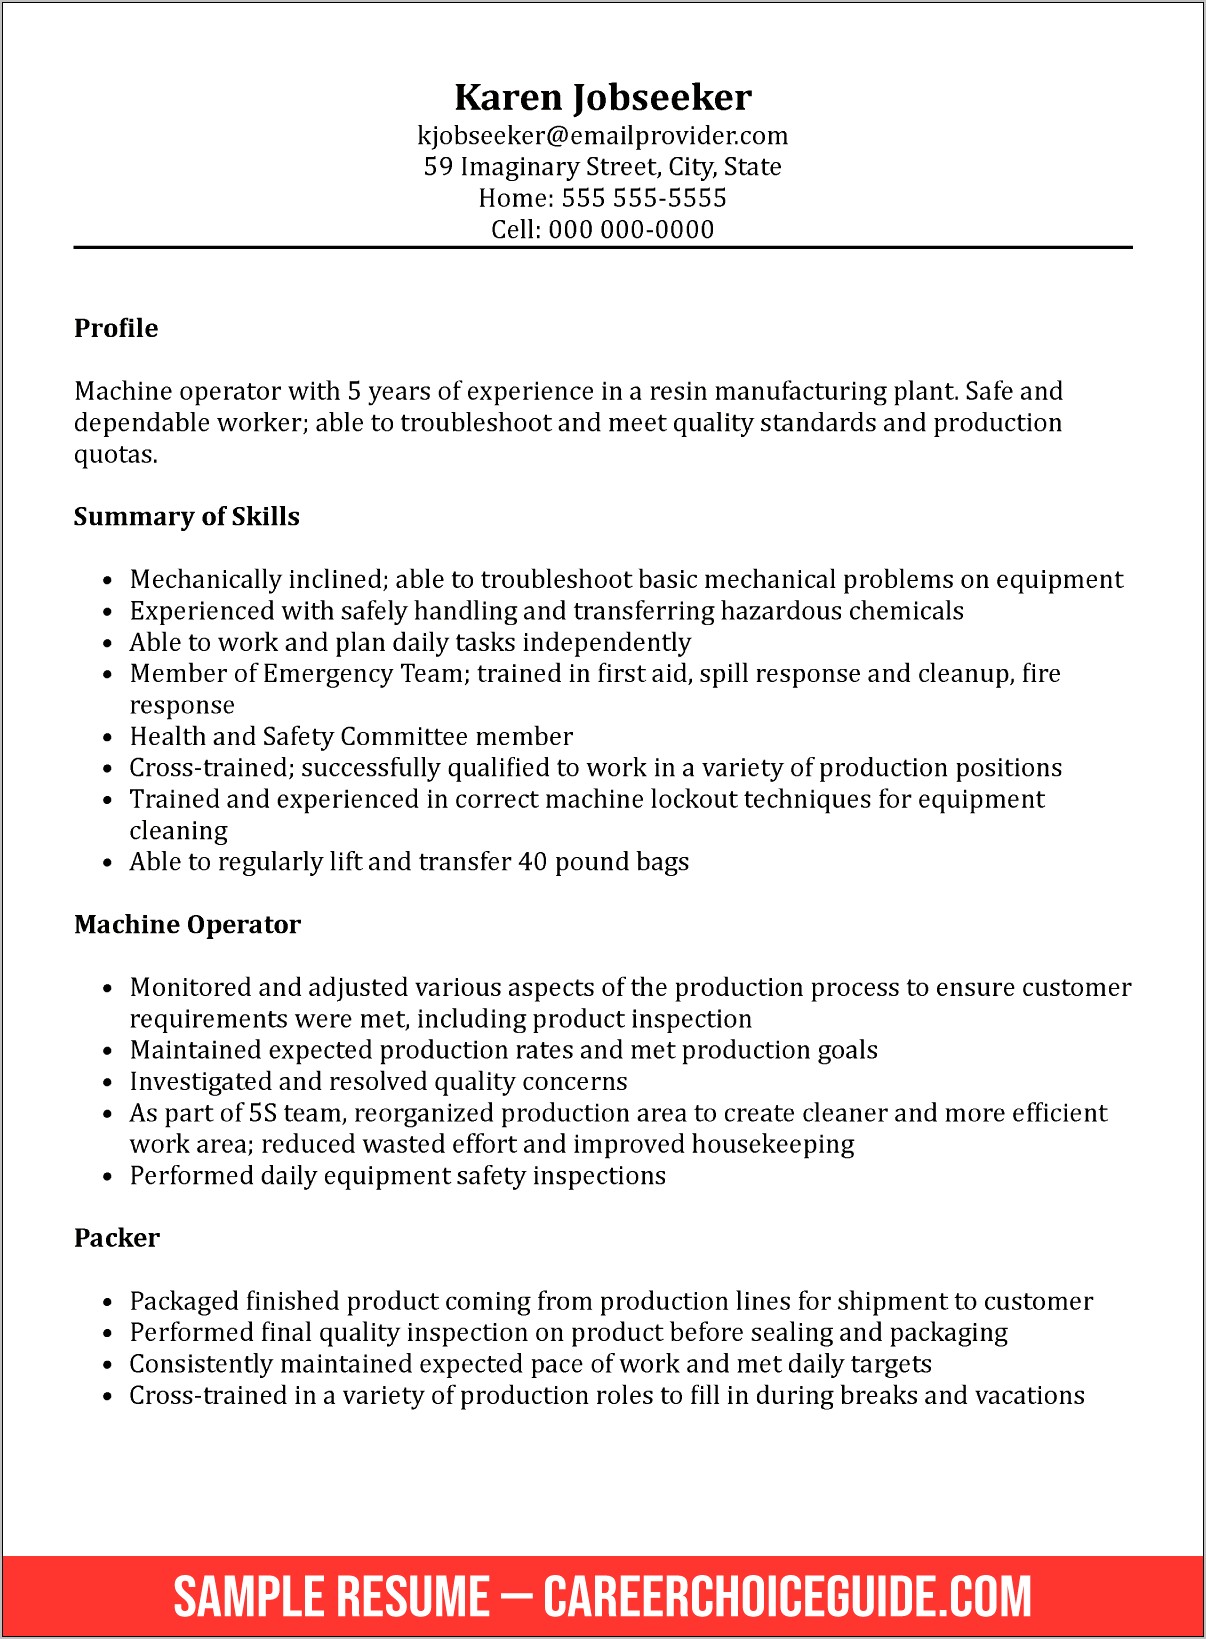 Examples Of Summary Of Qualifications For A Resume